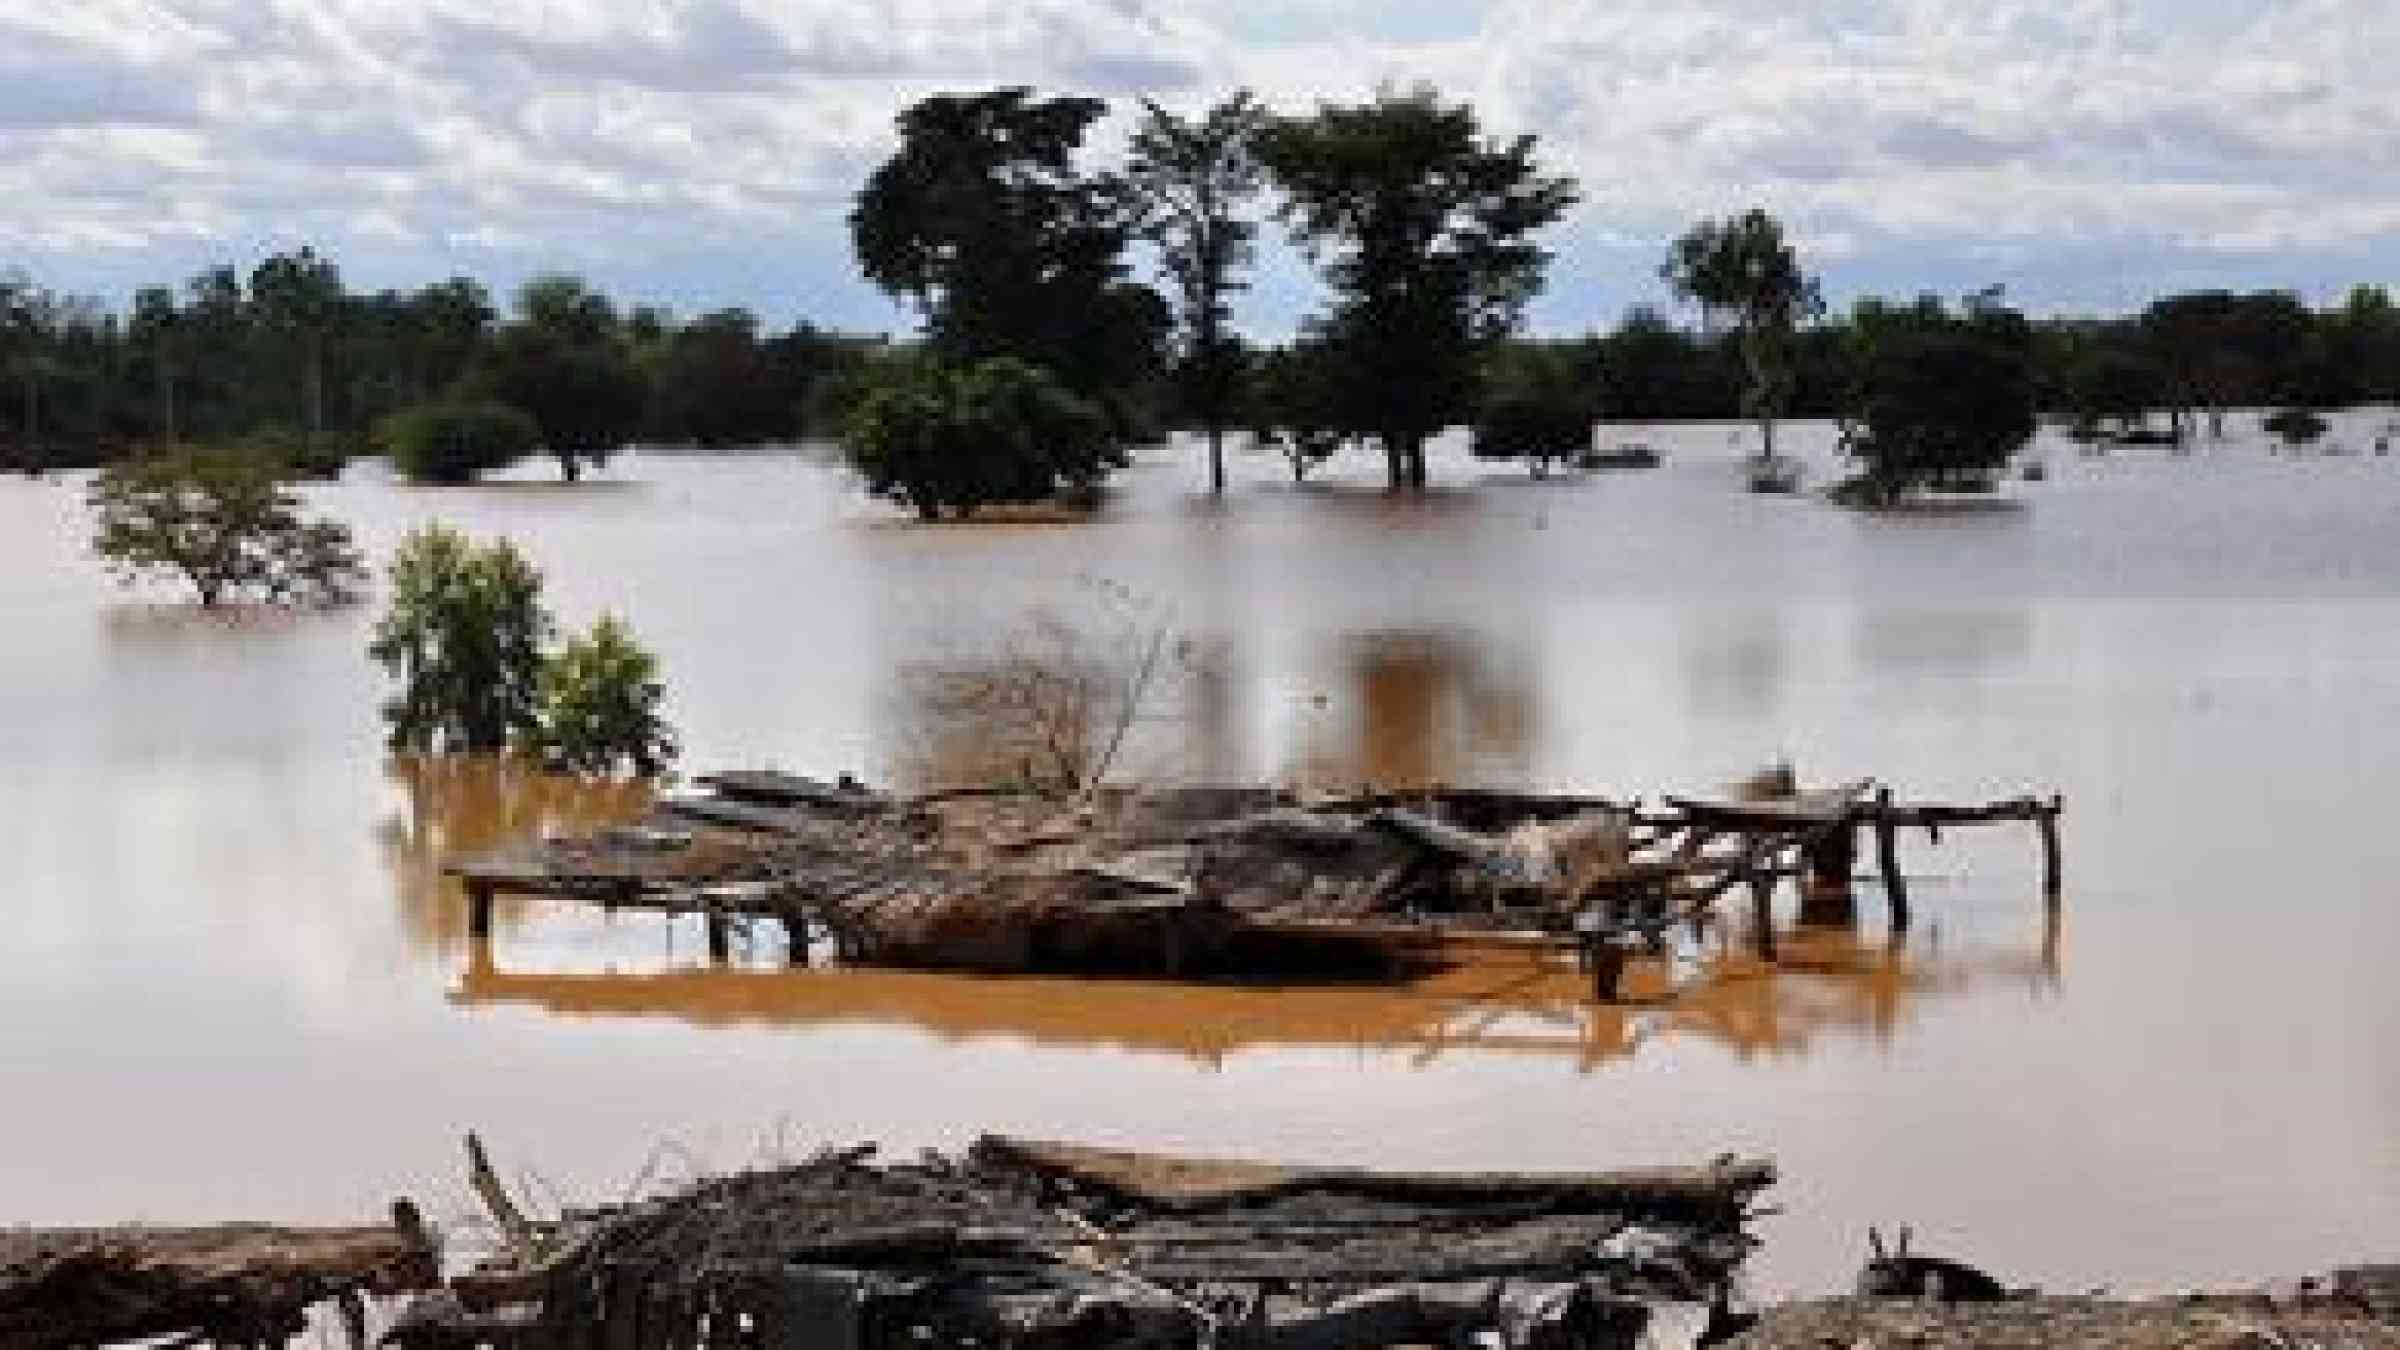 photo by Oxfam International -The river Niger exceeds its banks - https://www.flickr.com/photos/oxfam/8006491156 -CC BY-NC-ND 2.0